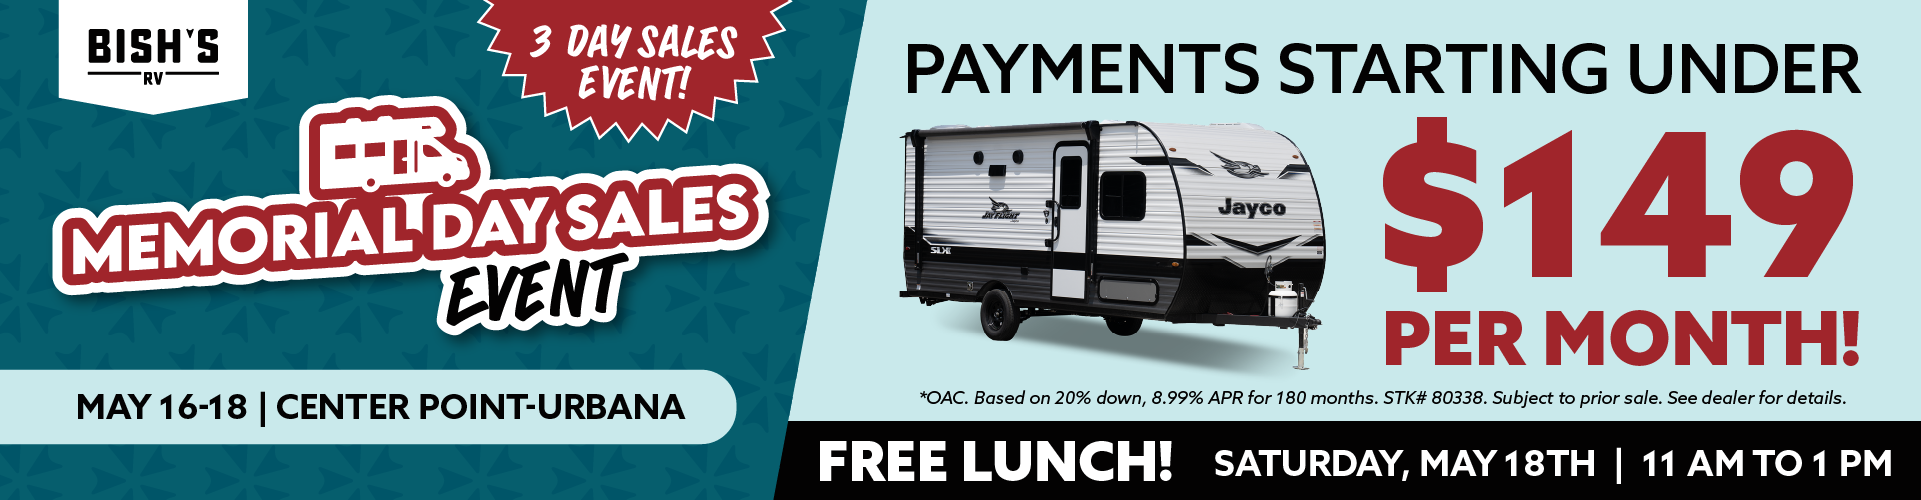 Memorial Day Sales Event - May 16-18 - Bish's RV of Center Point-Urbana, IA